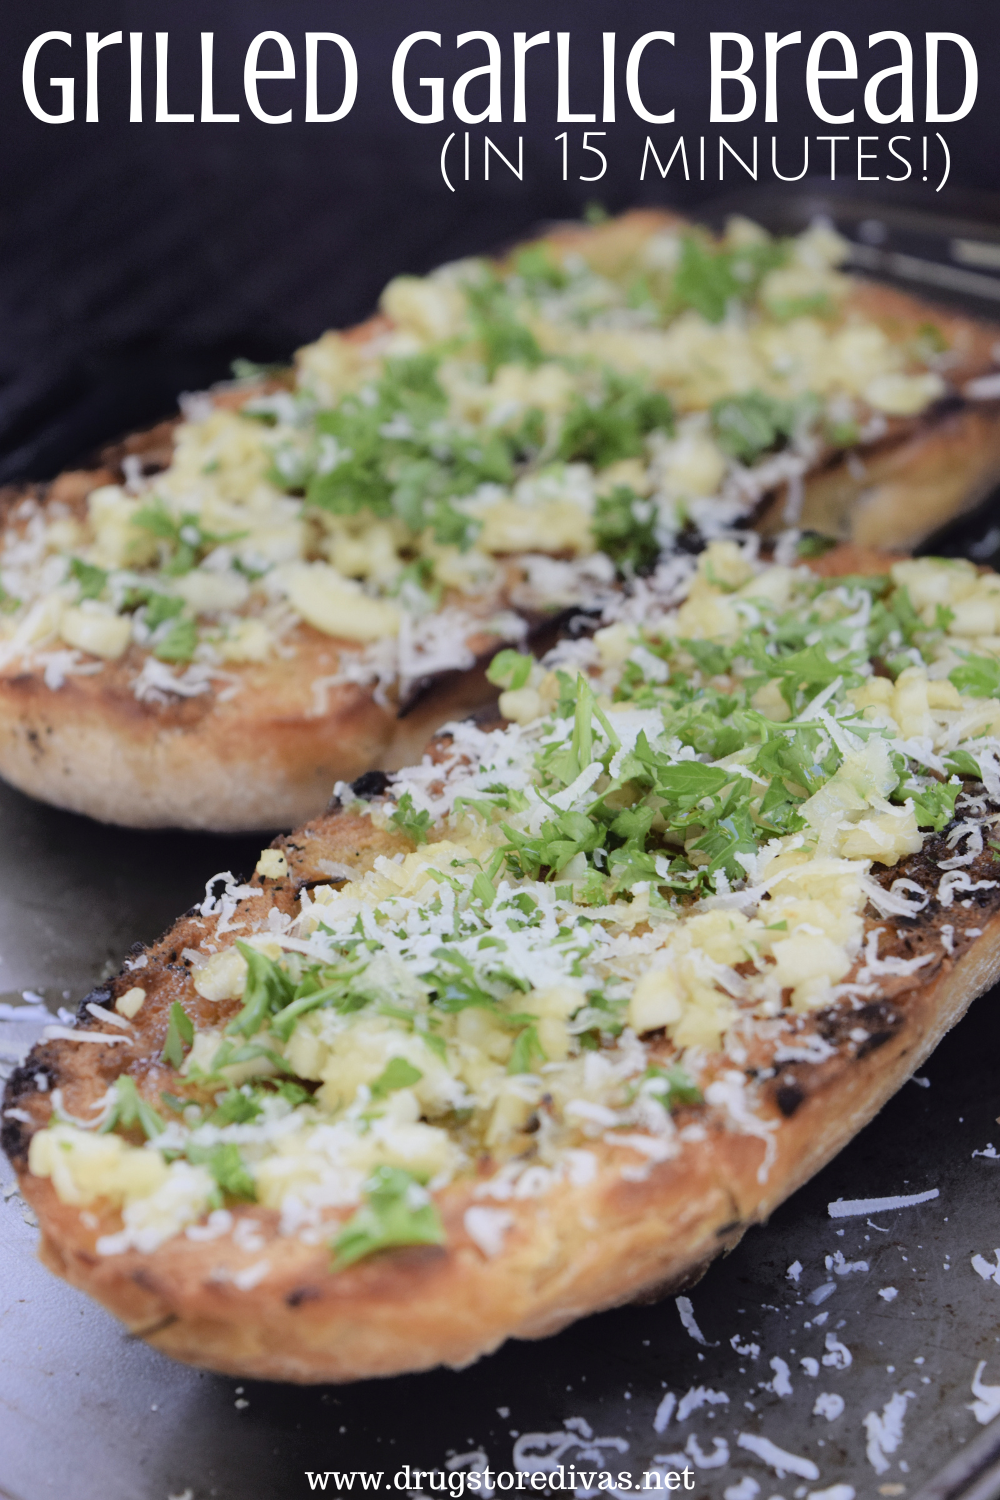 A loaf of bread with garlic, parsley, and cheese on top with the words 